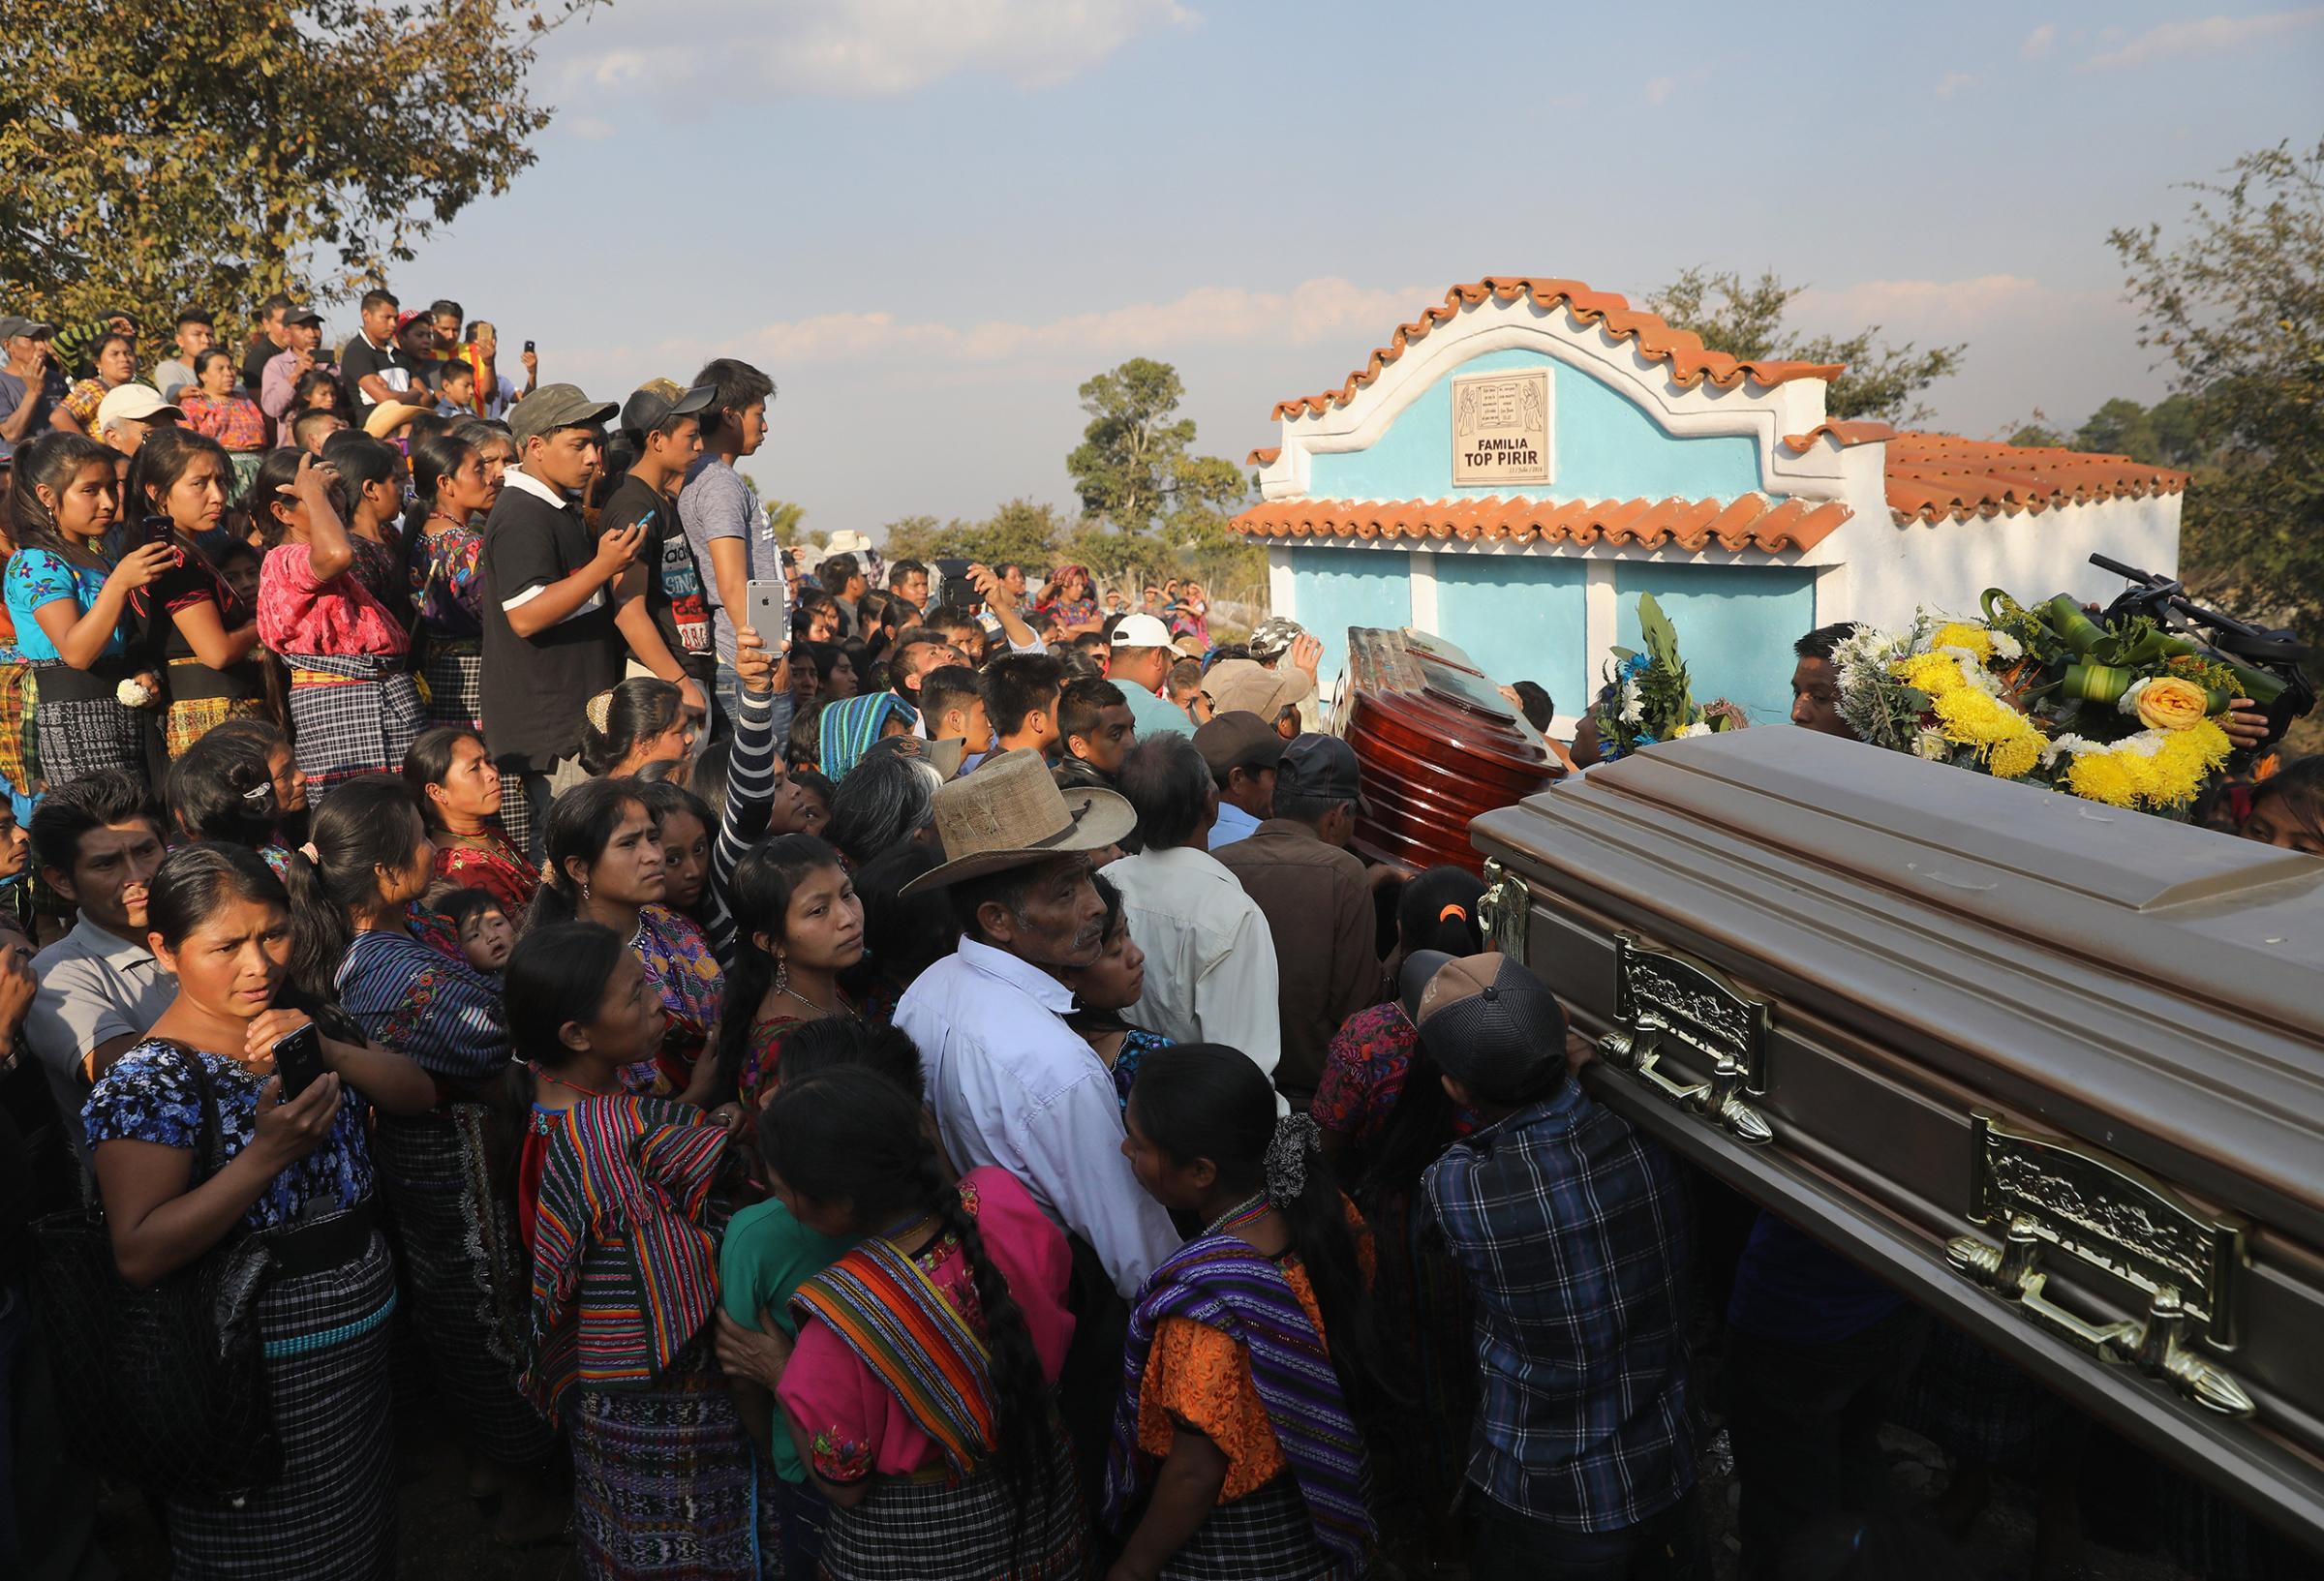 The bodies of two boys who were kidnapped and killed arrive to a cemetery for burial in San Juan Sacatepéquez, Guatemala, on Feb. 14, 2017.